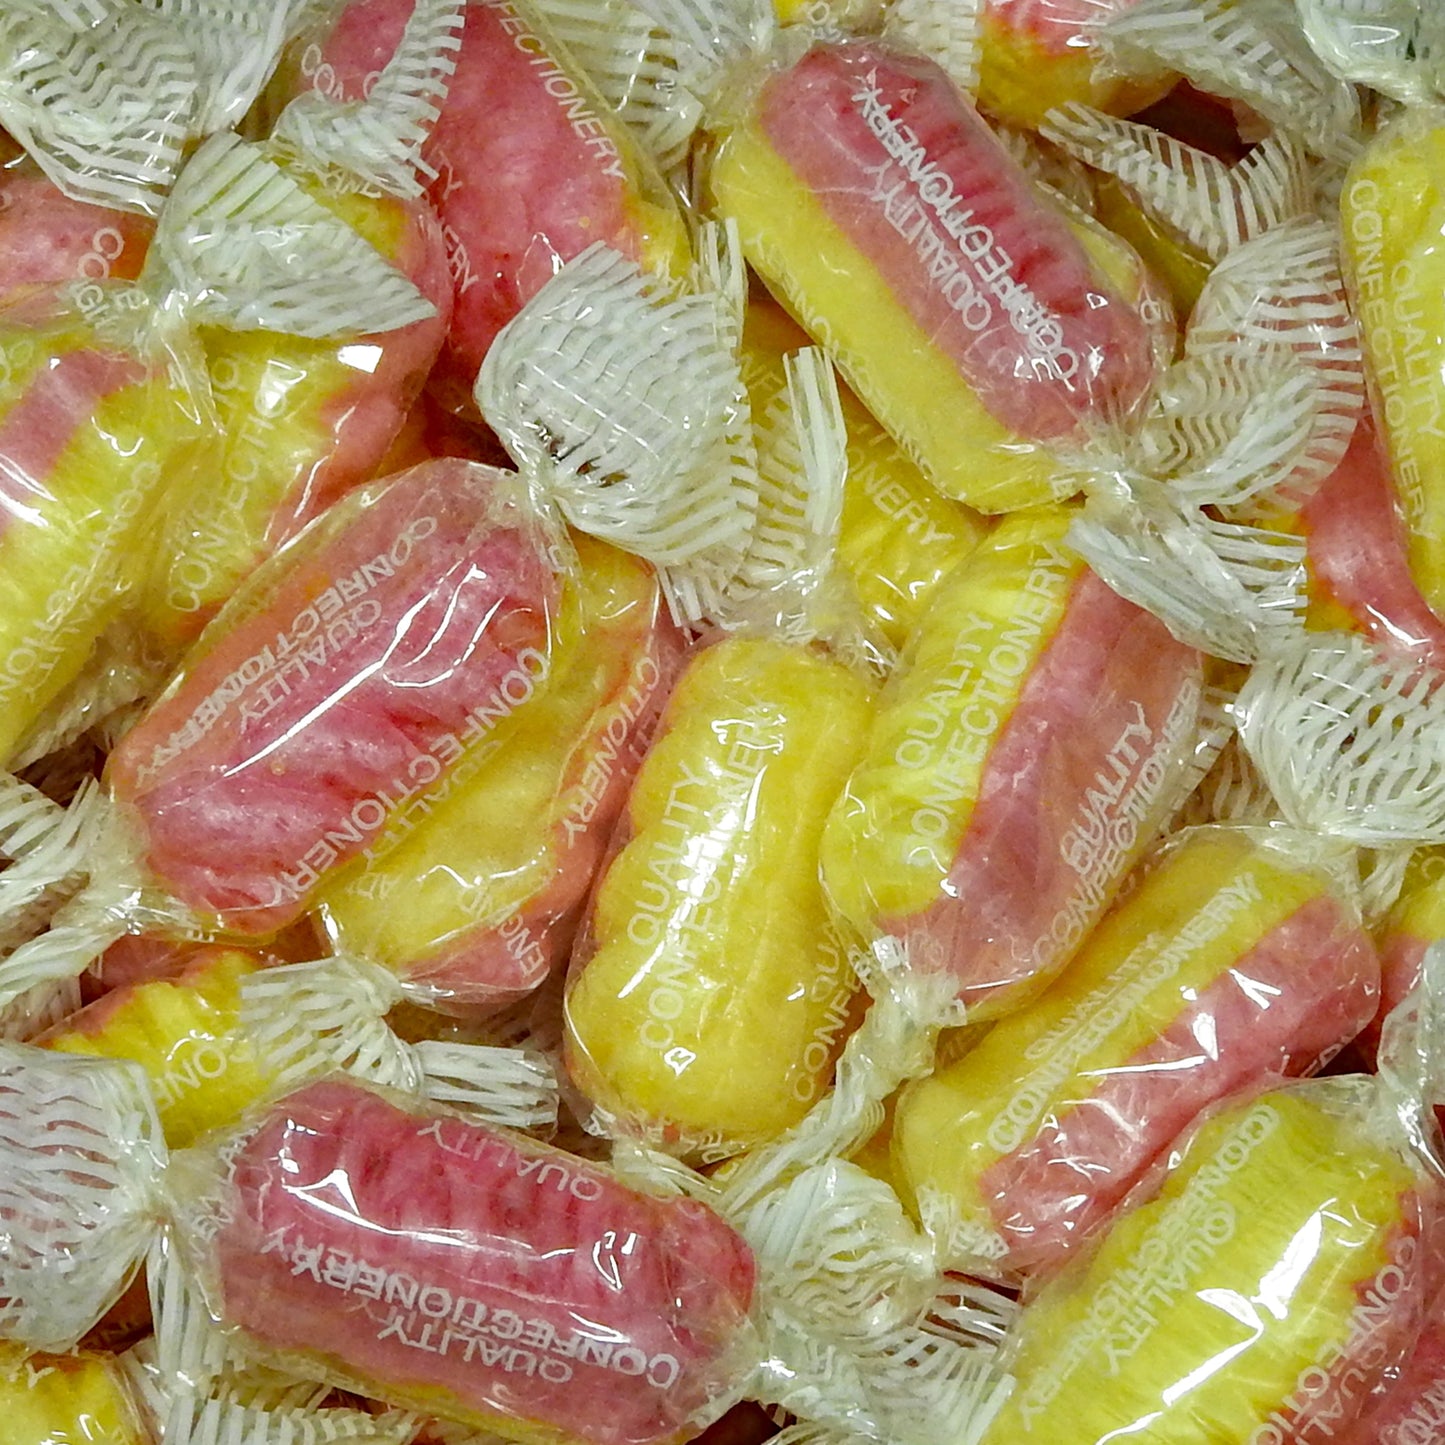 Rhubarb and Custard Sweets - Retro Sweets at The Sweetie Jar